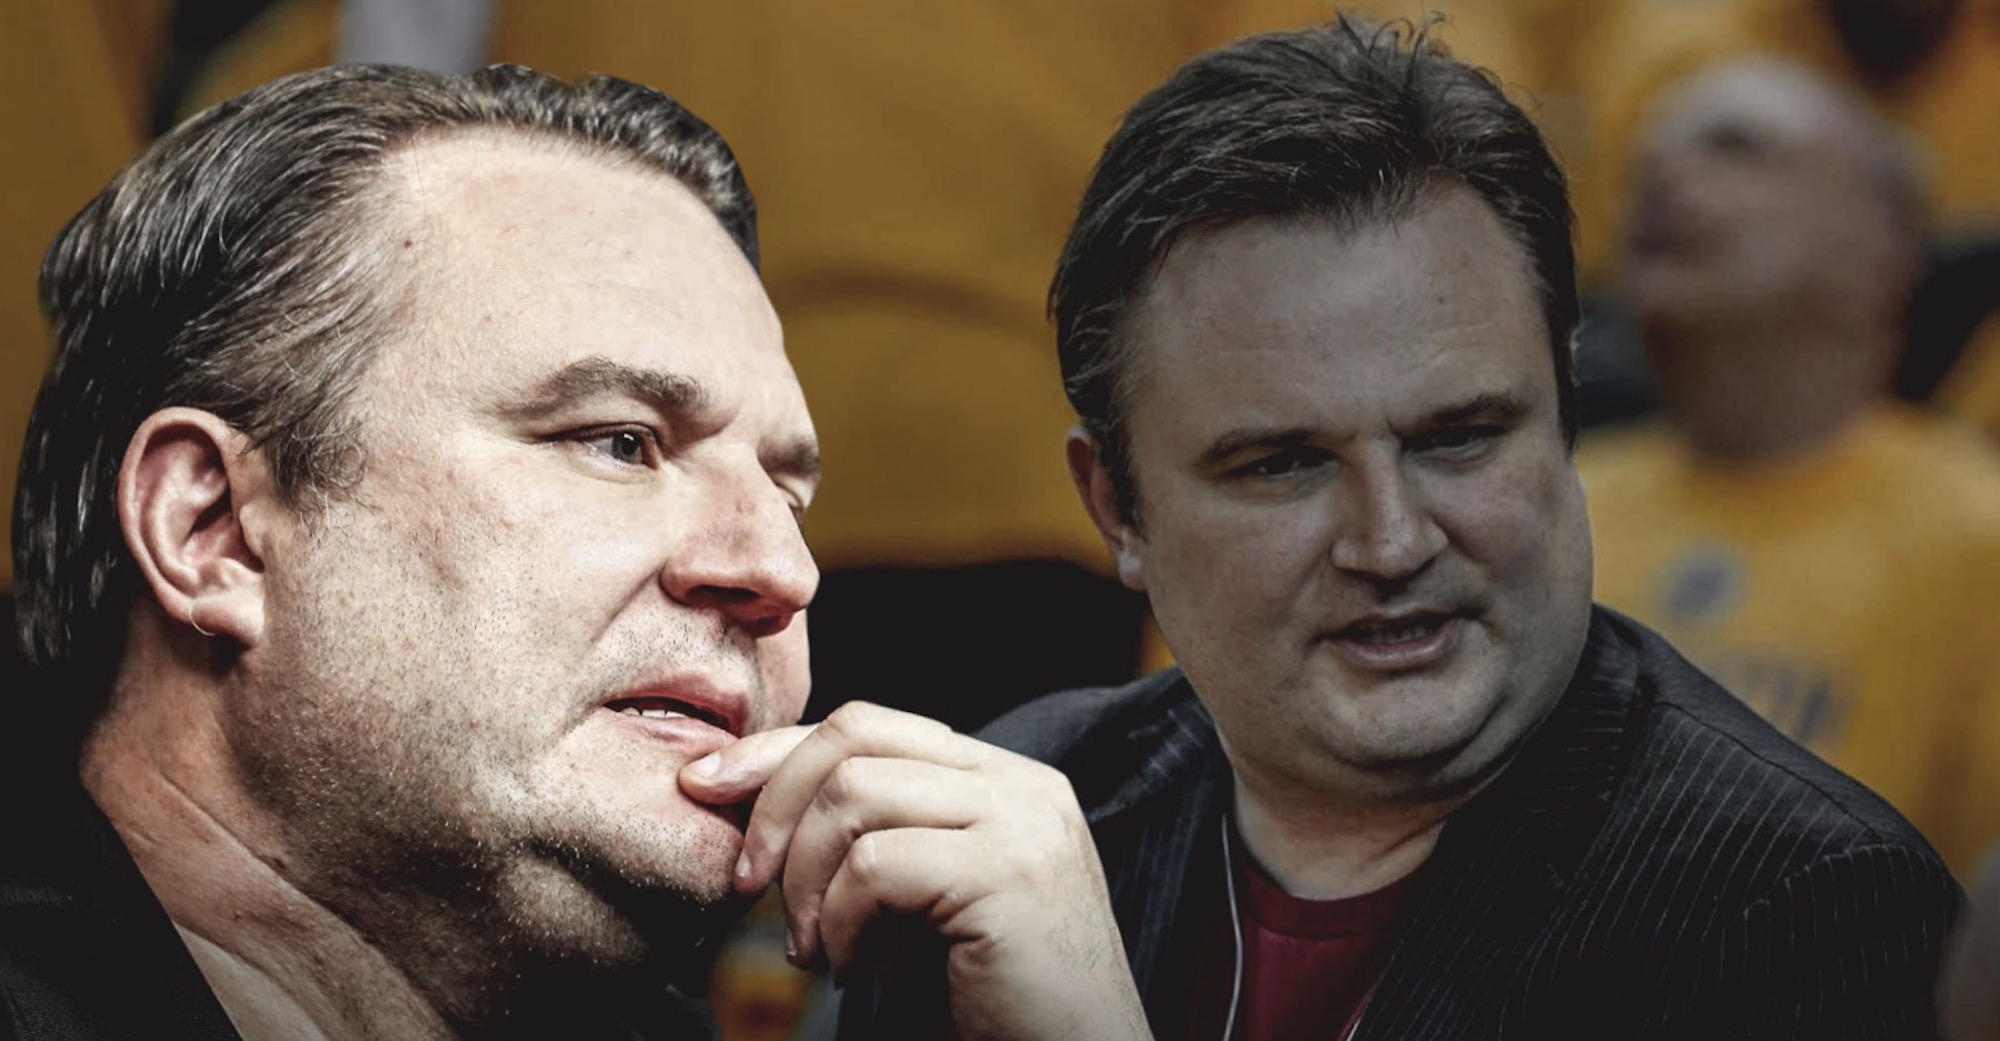 Chinese Fans Celebrate as Daryl Morey Resigns from Houston Rockets, but is this Going to Solve NBA’s Issues in China?